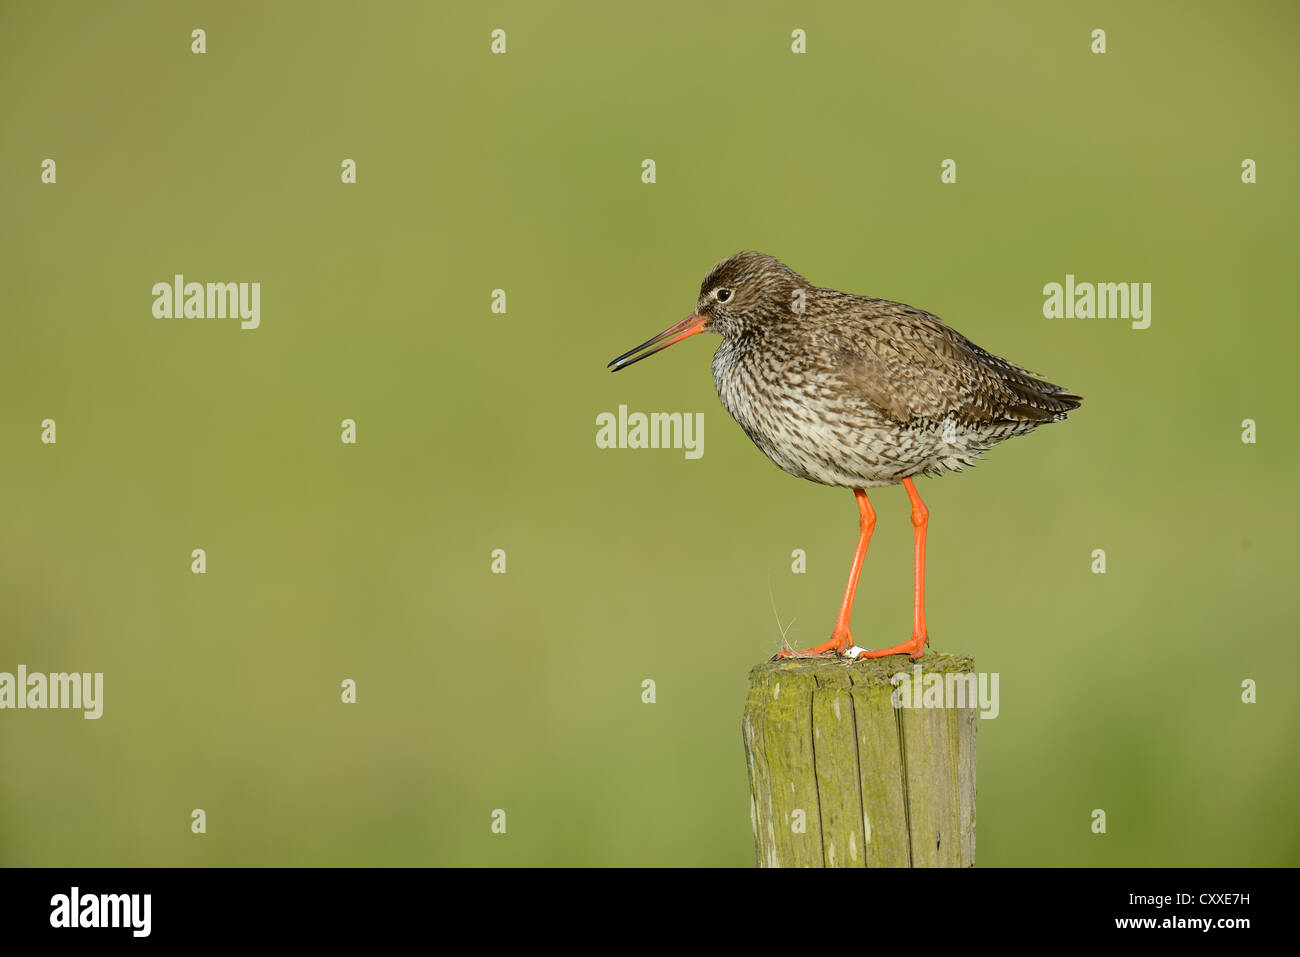 Common Redshank (Tringa totanus), perched on a post, Texel, The Netherlands, Europe Stock Photo